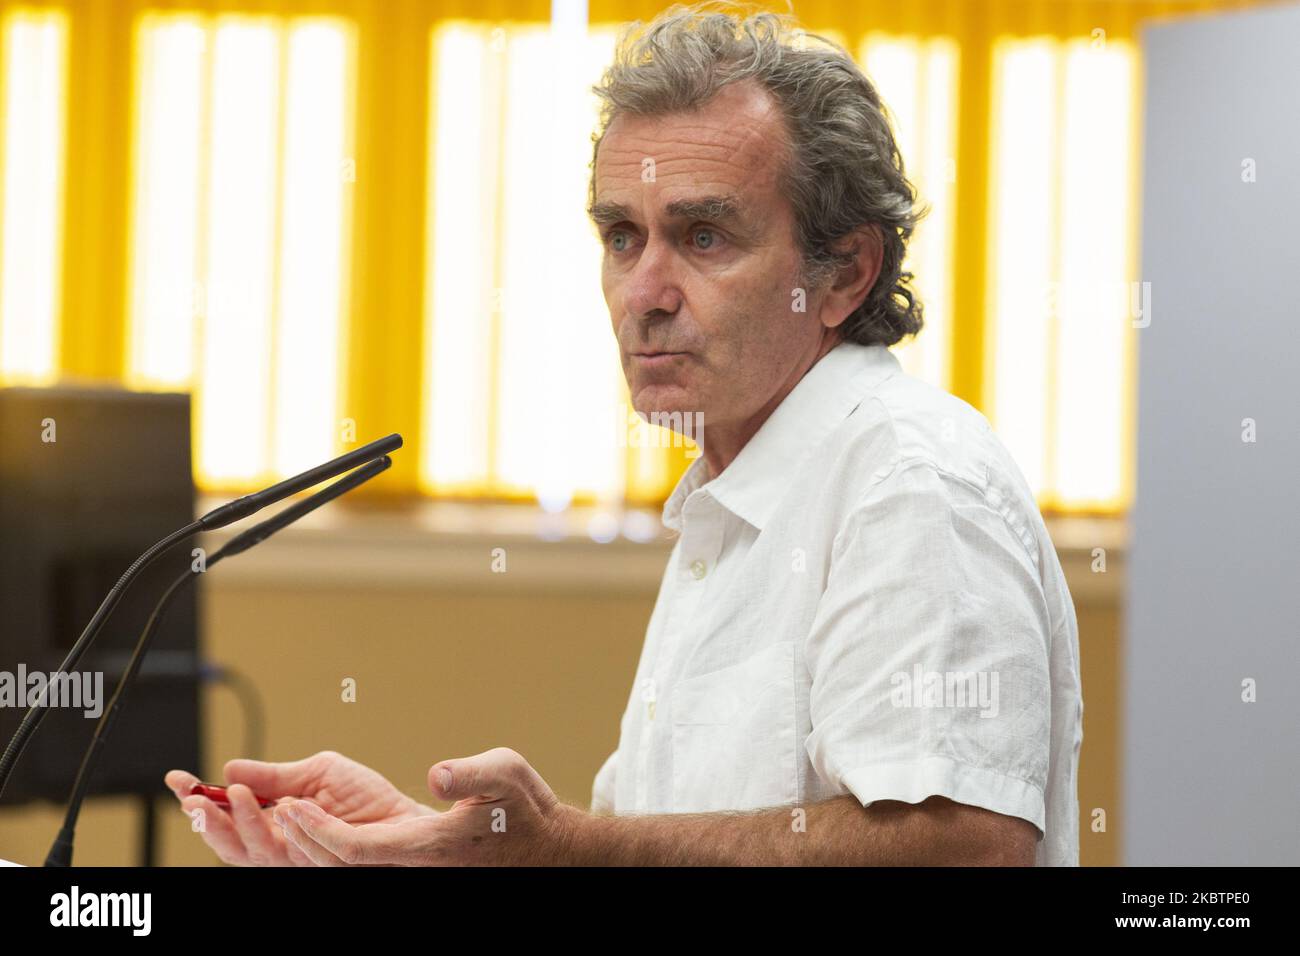 The director of the Center for the Coordination of Health Alerts and Emergencies, Fernando Simon, addresses to a journalist at a press conference to report on the evolution of COVID-19, on July 16, 2020 in Madrid, Spain. (Photo by Oscar Gonzalez/NurPhoto) Stock Photo